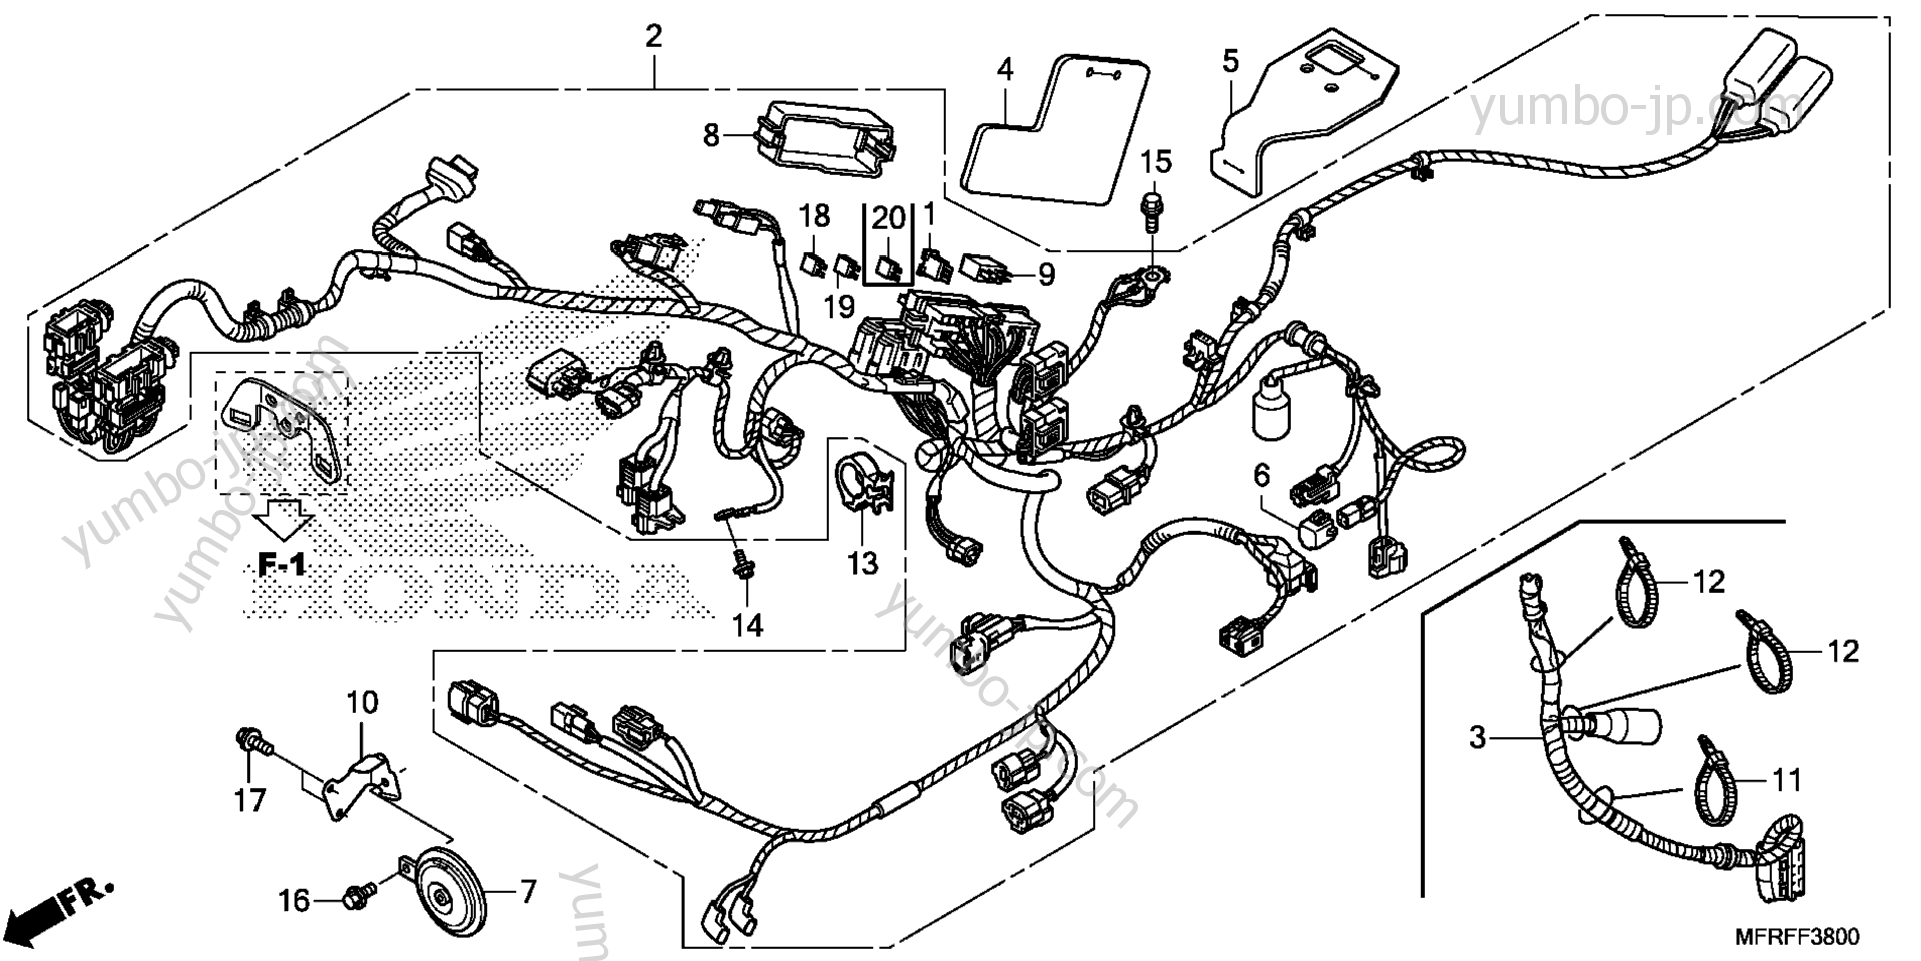 WIRE HARNESS (1) for motorcycles HONDA VT1300CTA A 2015 year